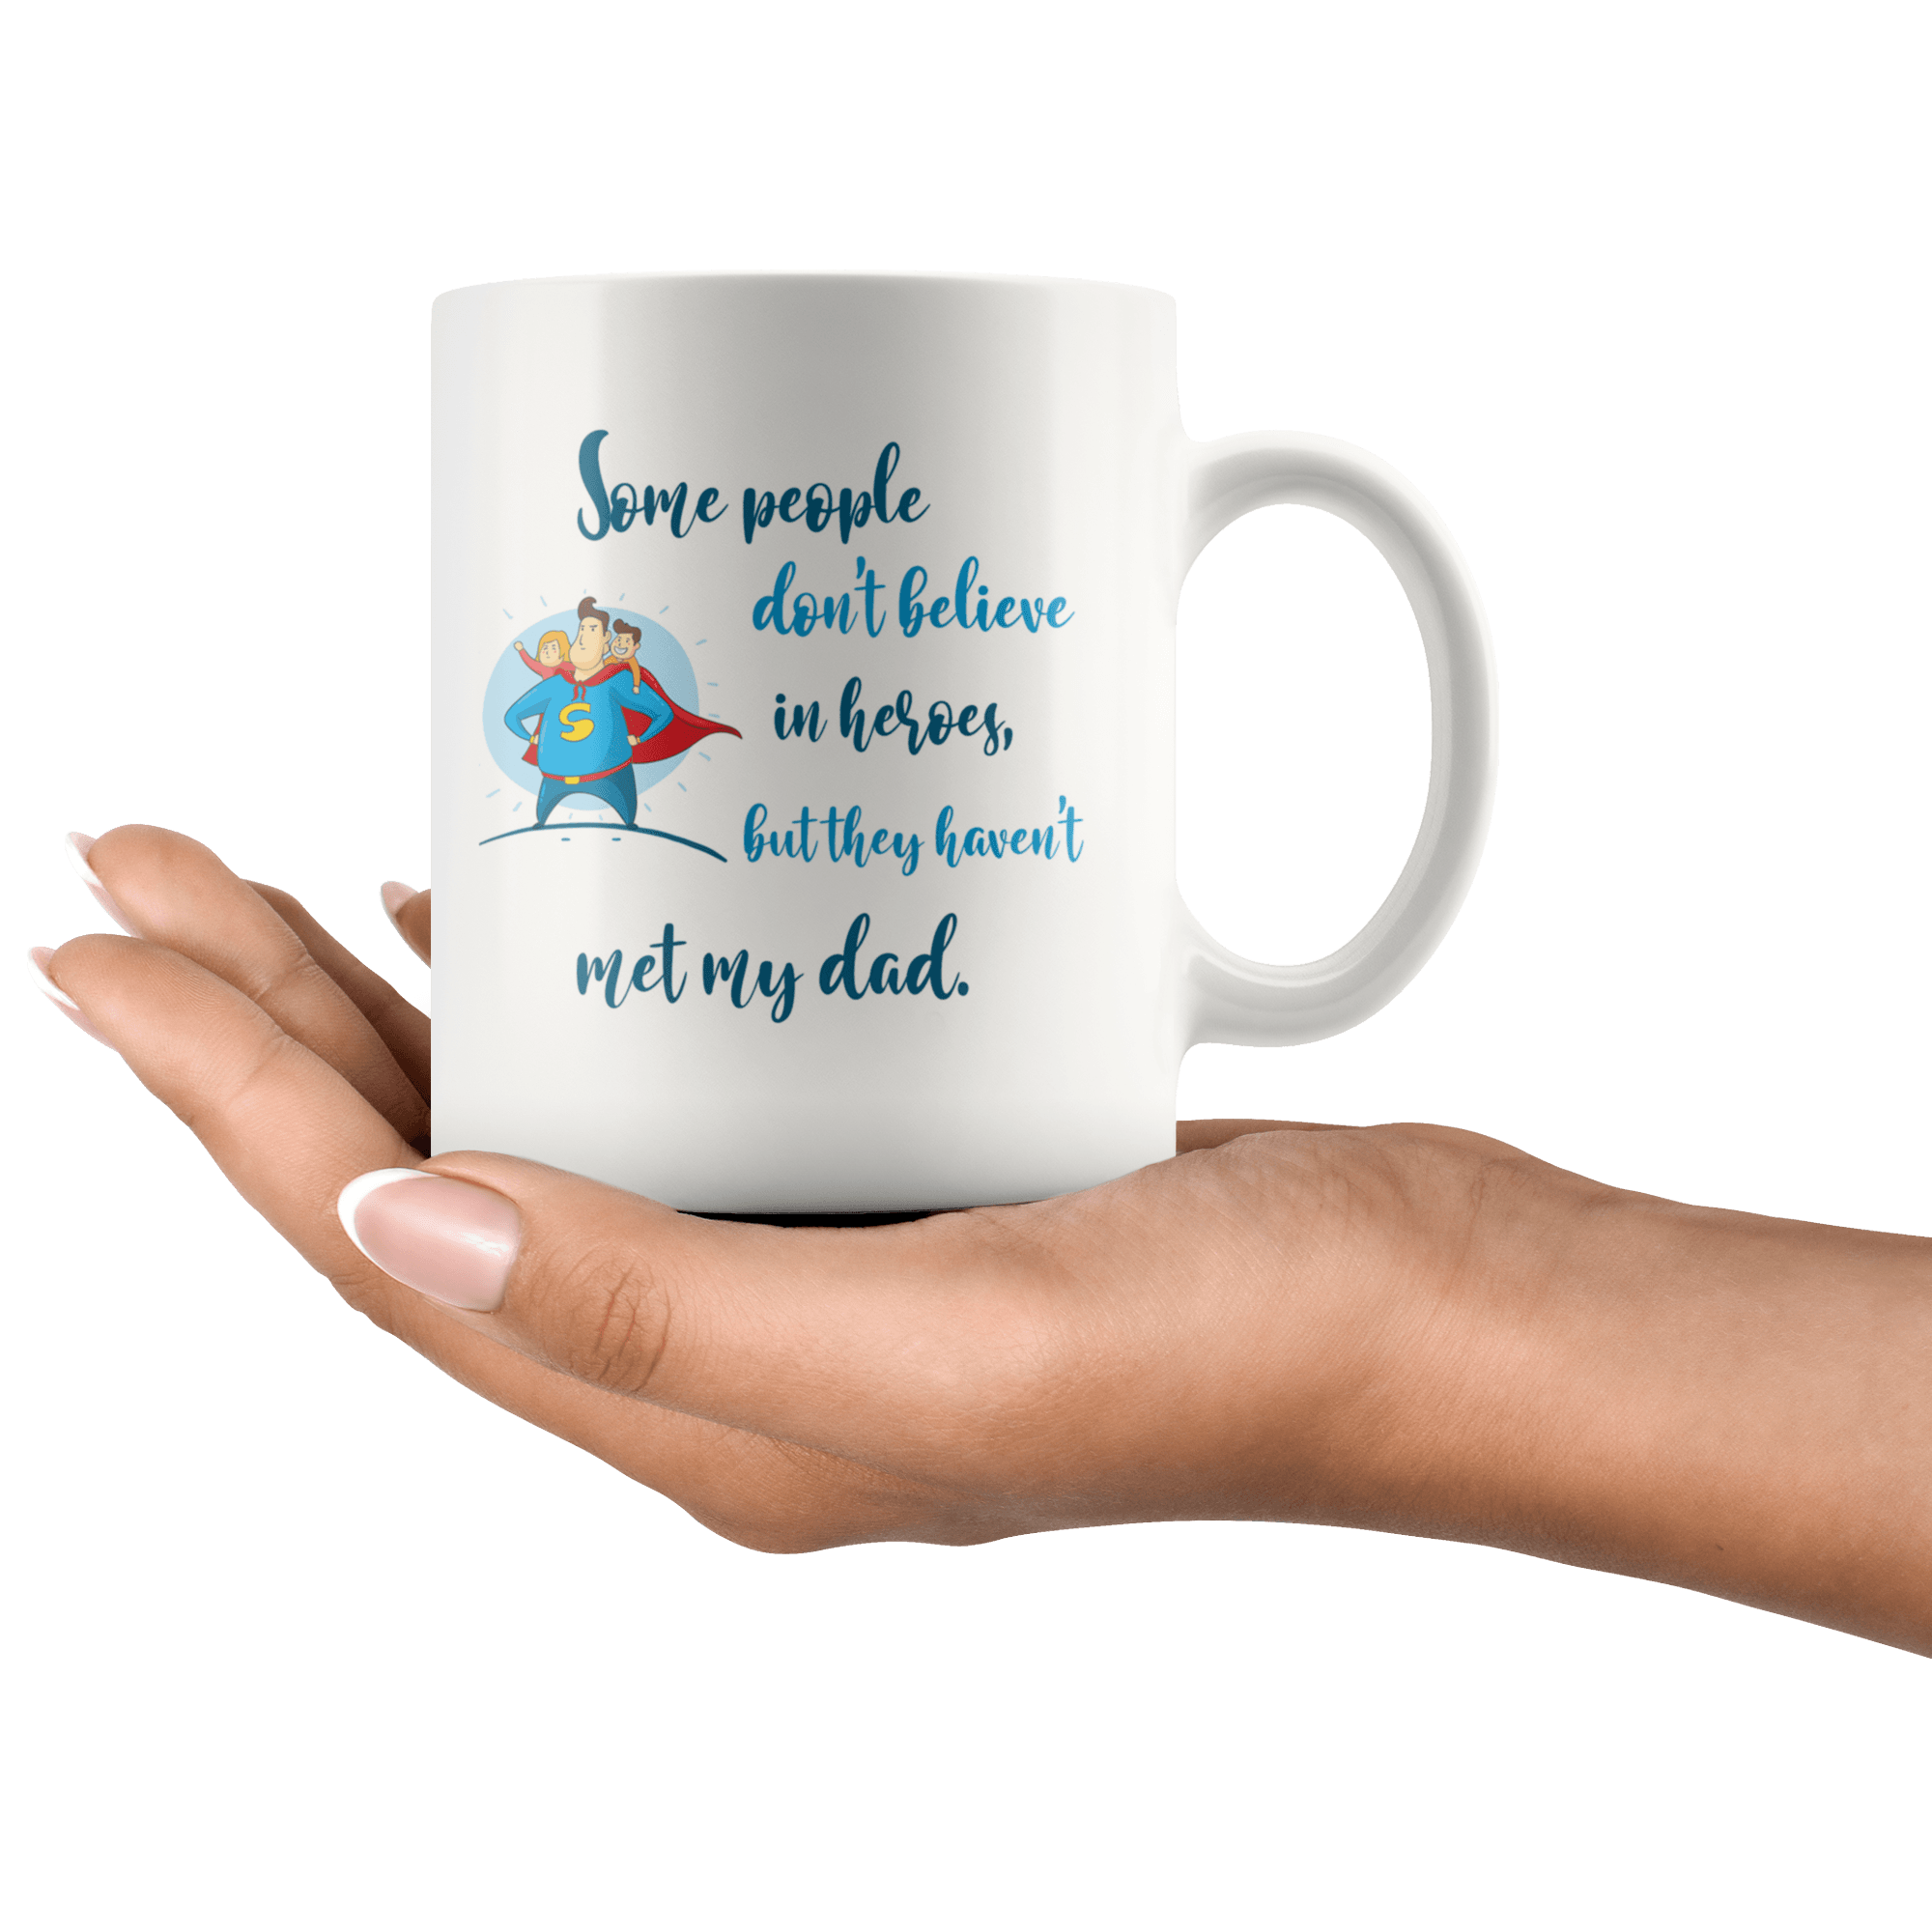 Great Coffee Mug For Father - Some People Don't Believe In Heroes, But They Haven't Met My Dad - SPCM